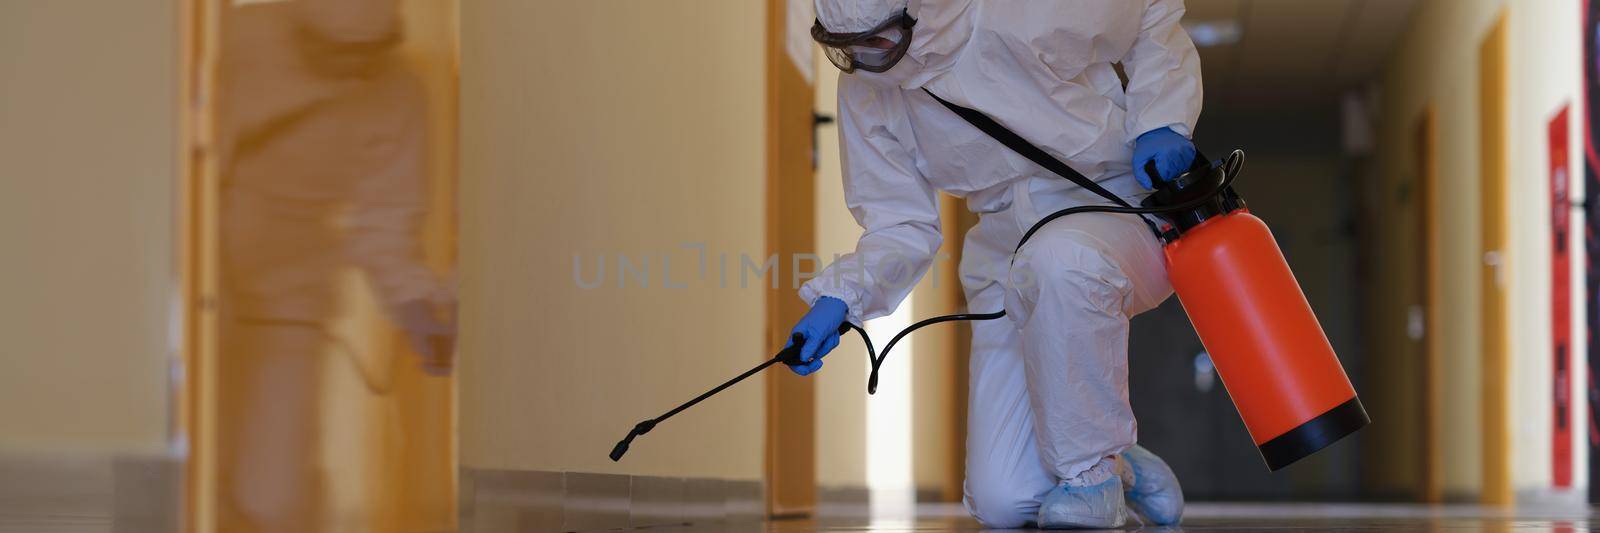 A man in a protective suit splashes from a cylinder onto the plinth in the corridor. Disinfection of premises, spread of viruses and harmful microorganisms